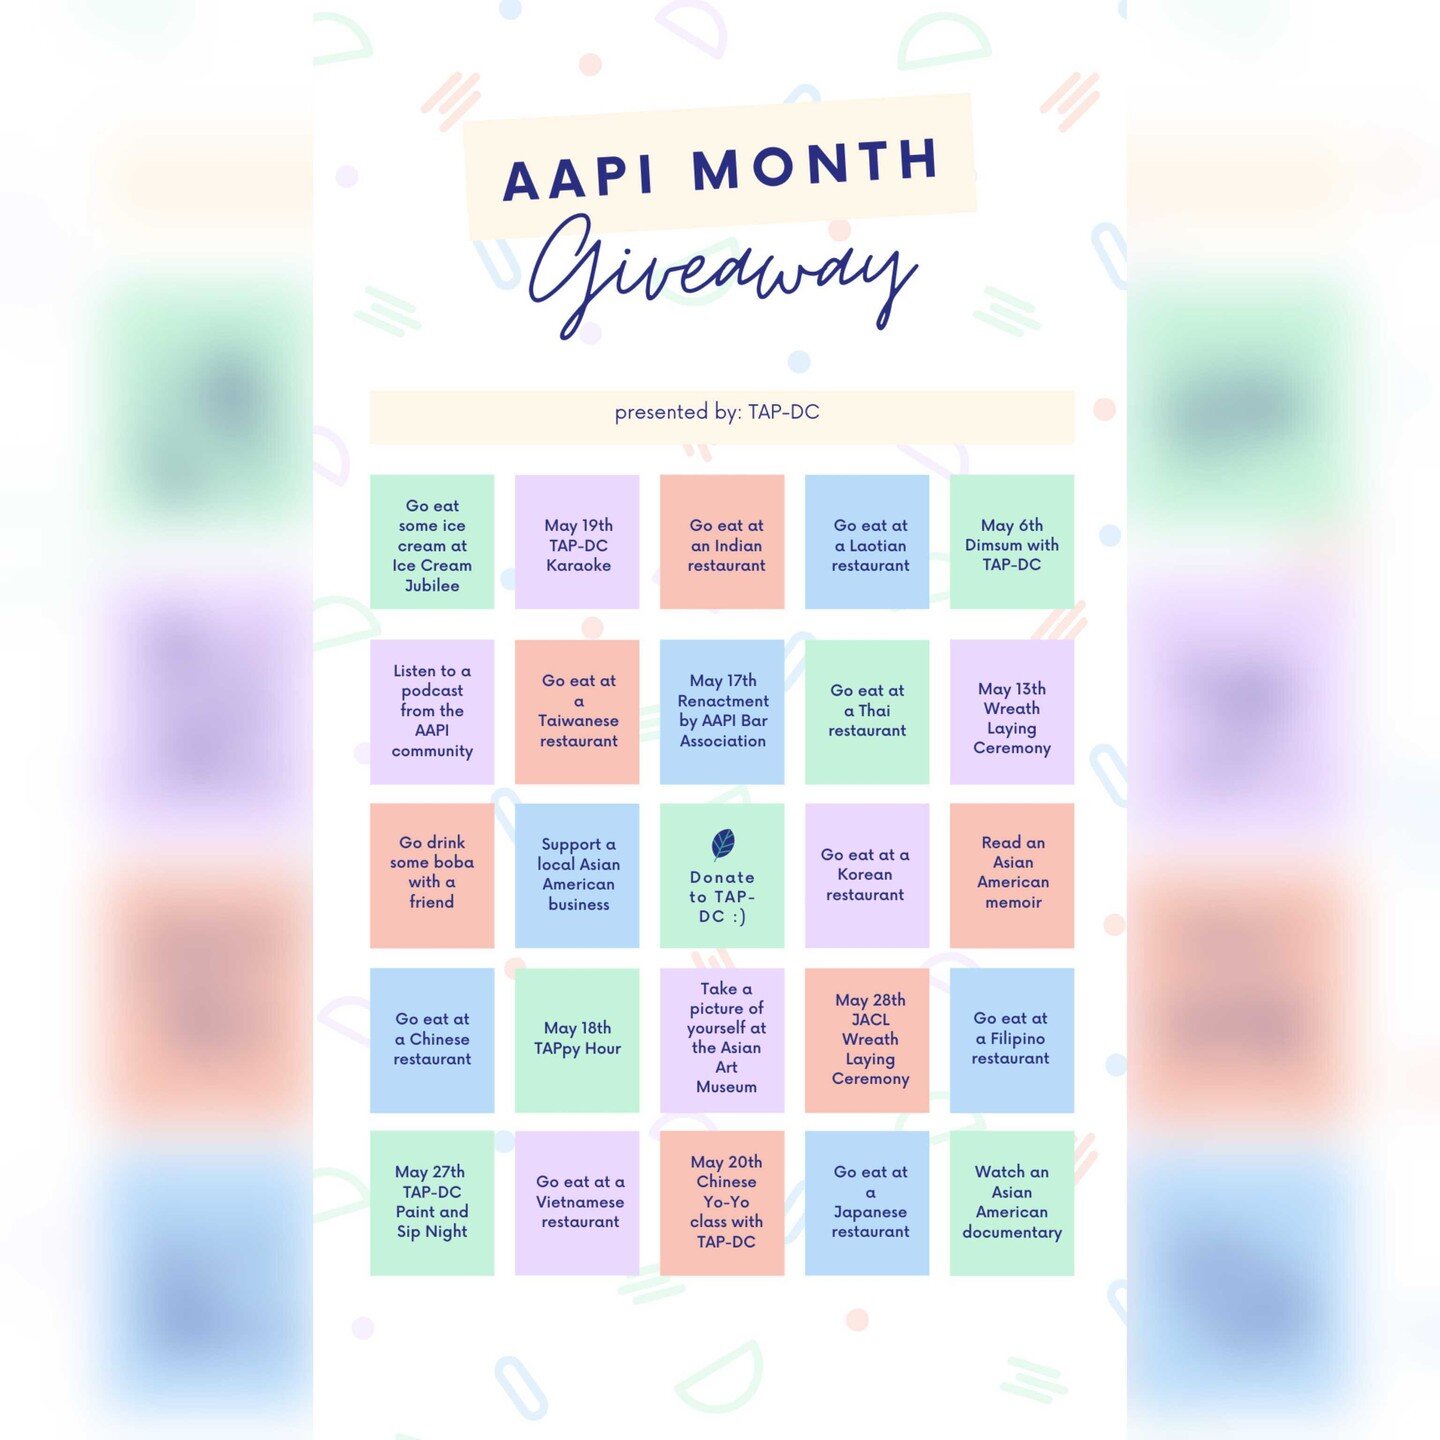 Happy May and Asian American Pacific Islander Heritage Month! 

To celebrate we are announcing a special giveaway event, details below: 

*GIVEAWAY ALERT* AAPI Month is upon us , and TAP-DC wants to celebrate and see you live it up! 

To participate,